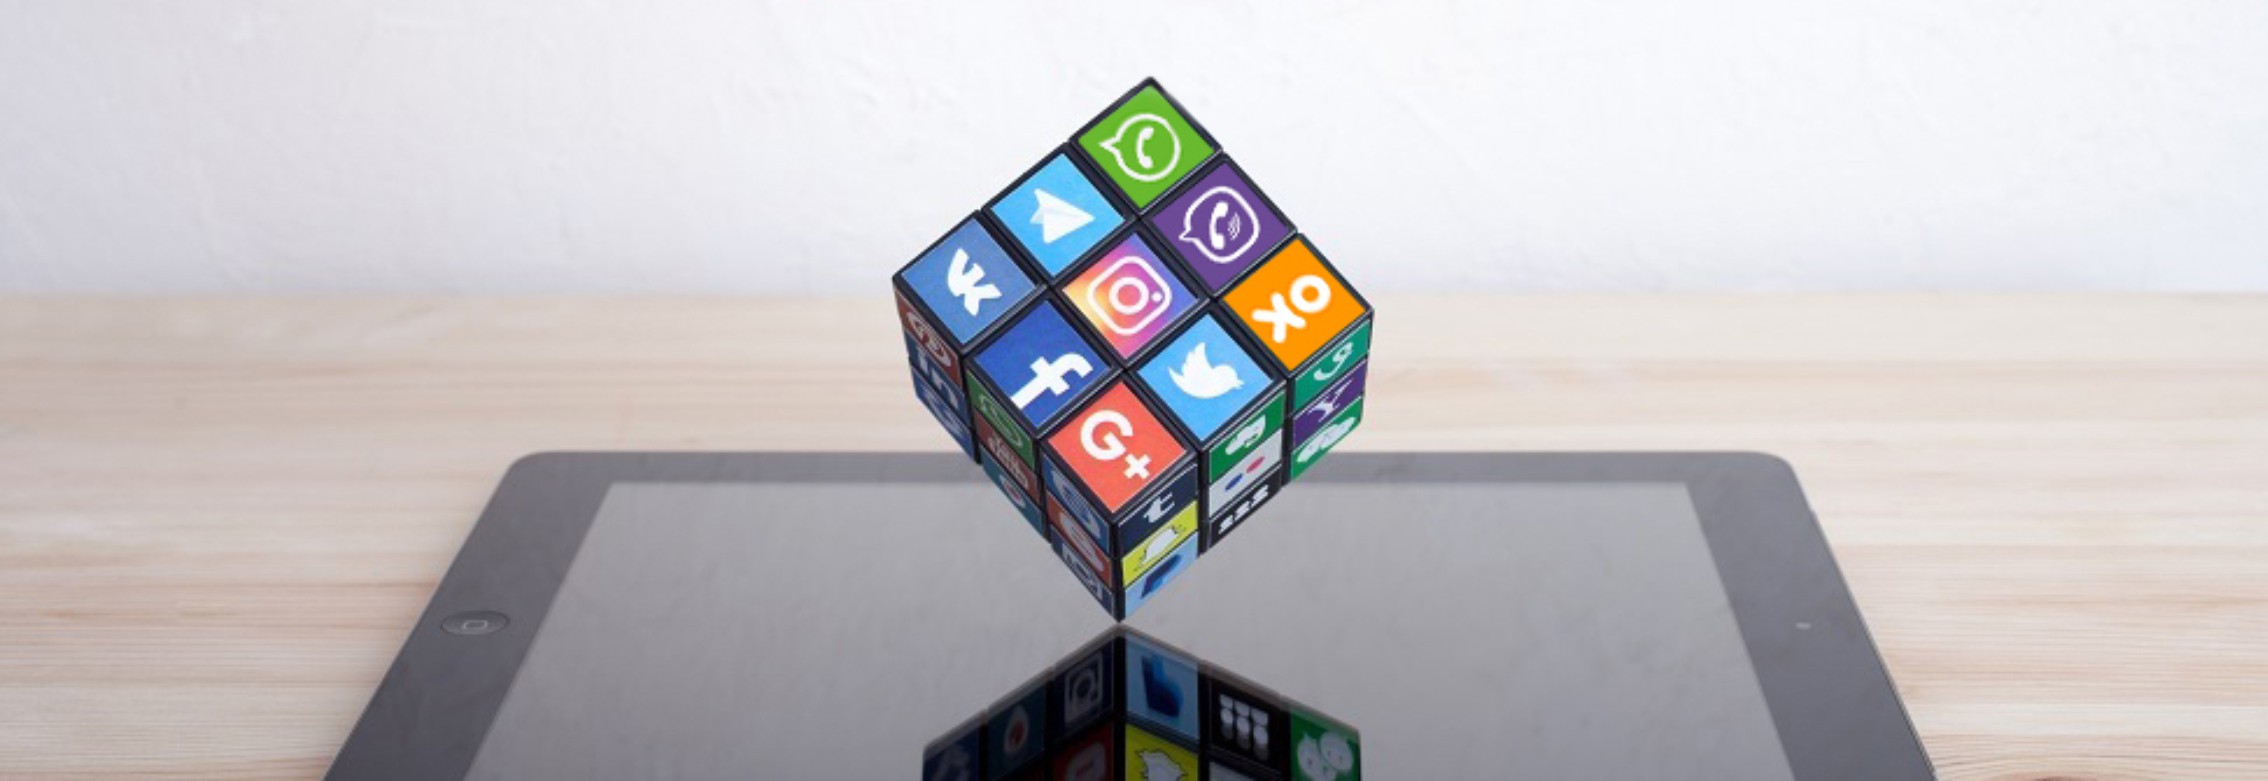 Rubik's cube with social media icons